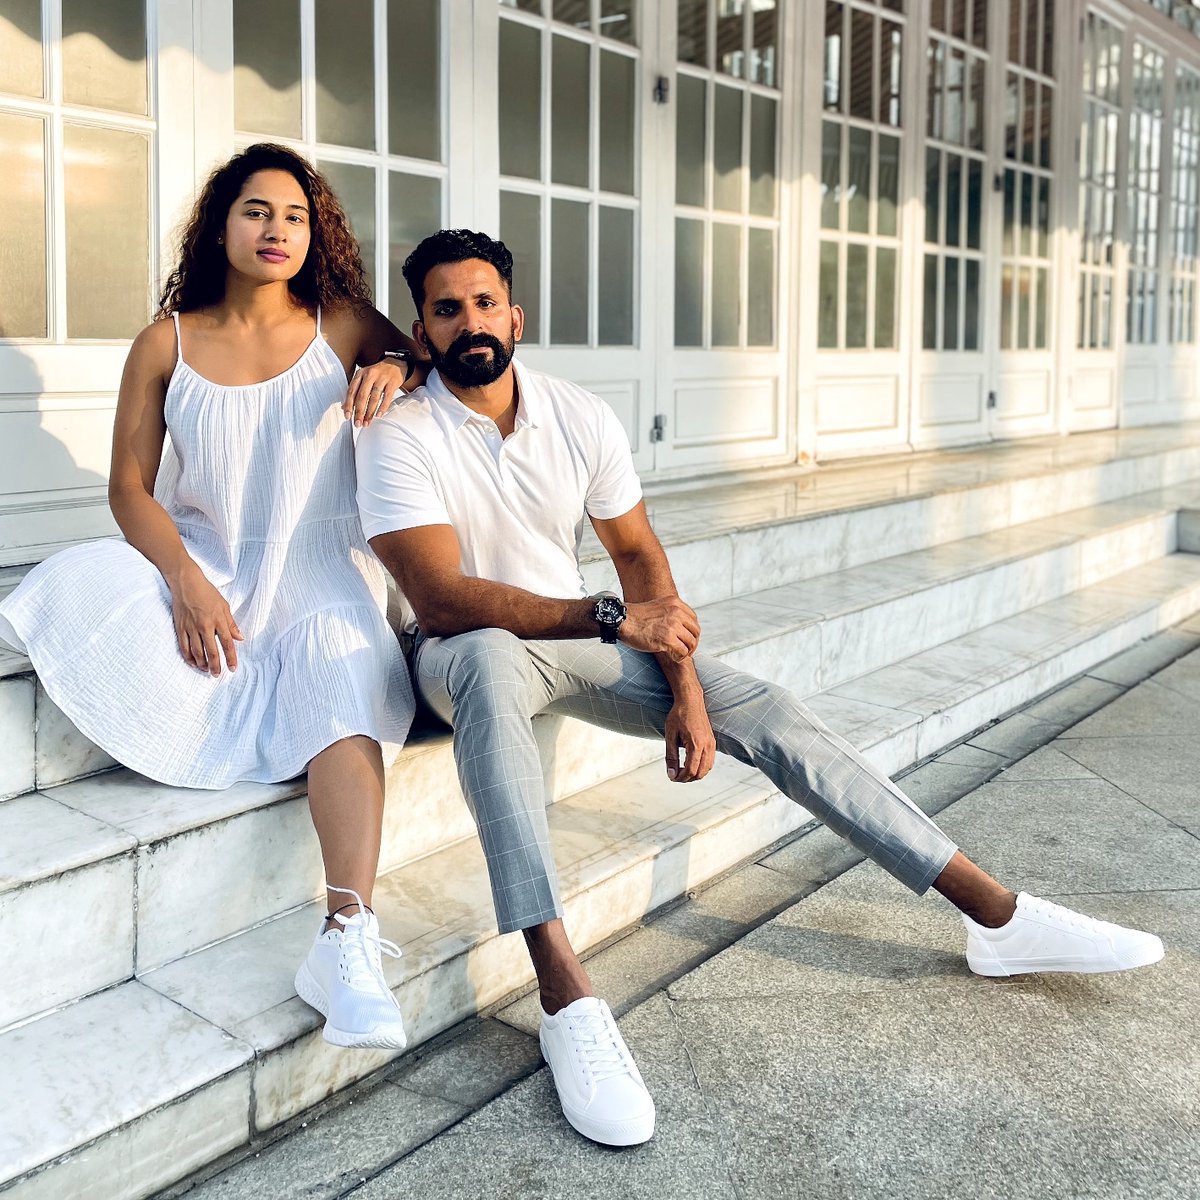 For the love of whites with @Poojaram22.

Location: ITC Windsor Manor, Bengaluru.

#couplesthattravel #fortheloveofwhite #whitesonly #fashionphotography